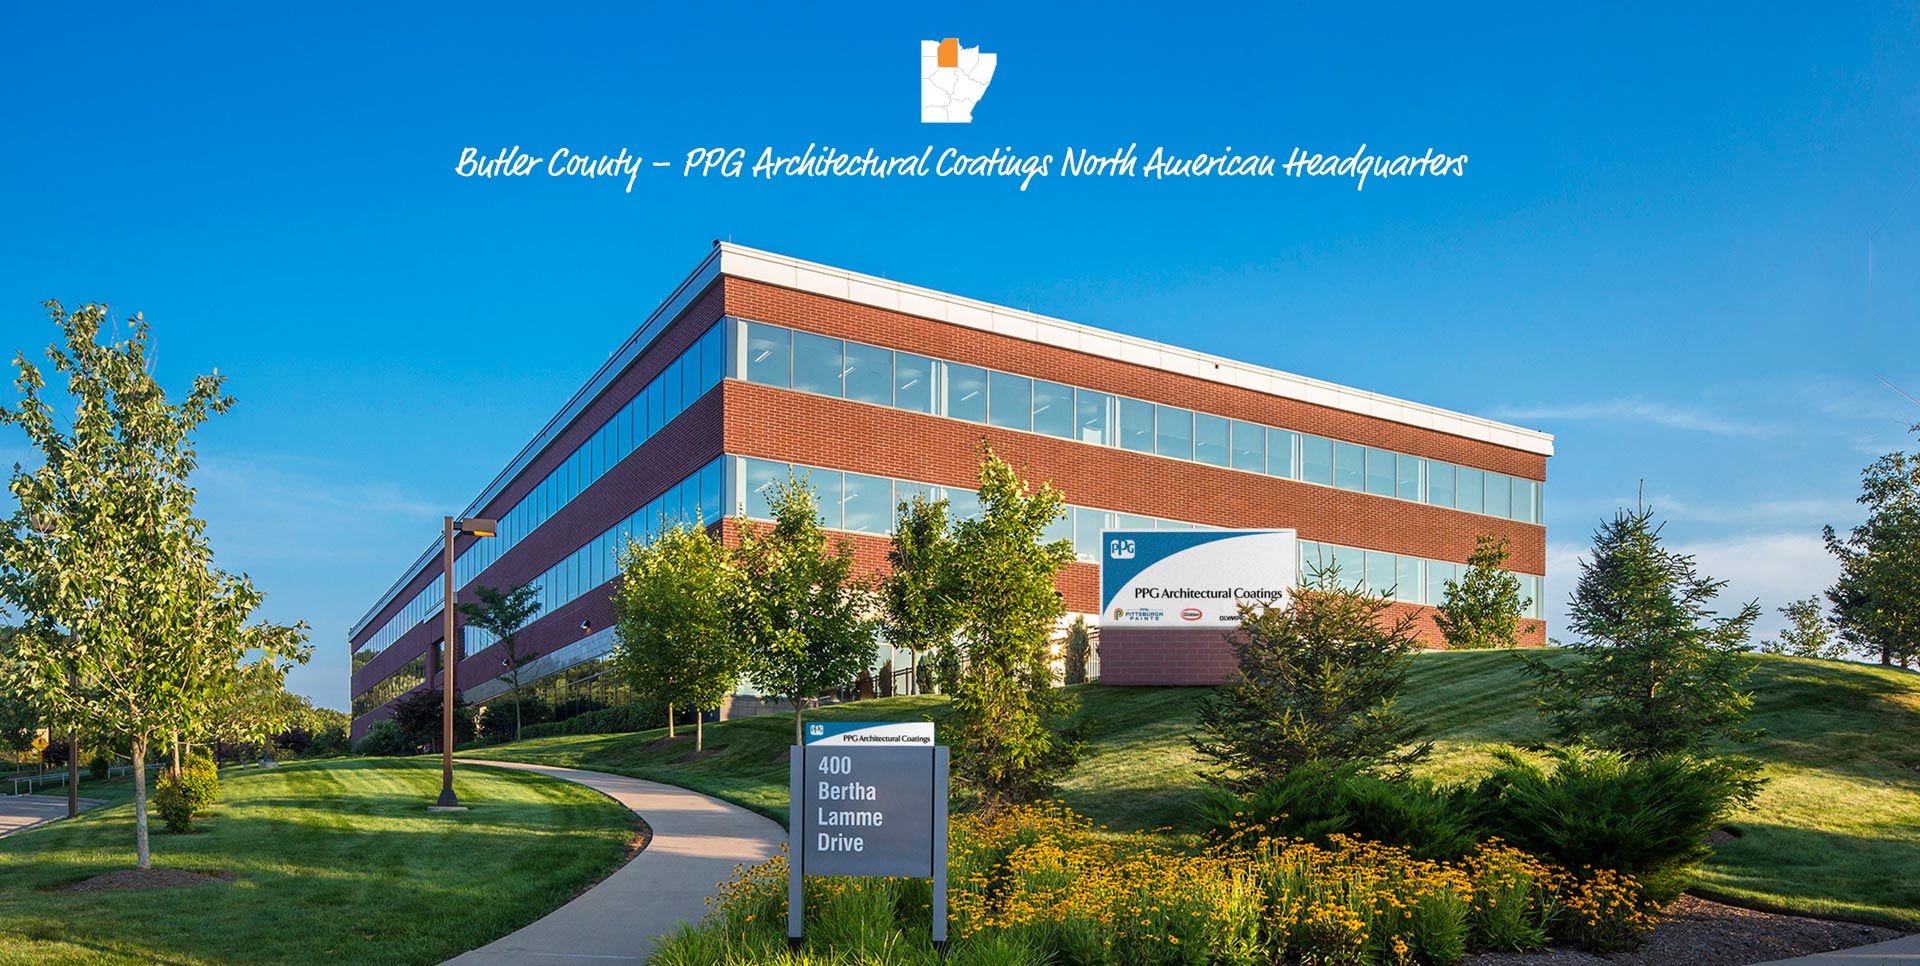 Butler County – PPG Architectural Coatings North American Headquarters